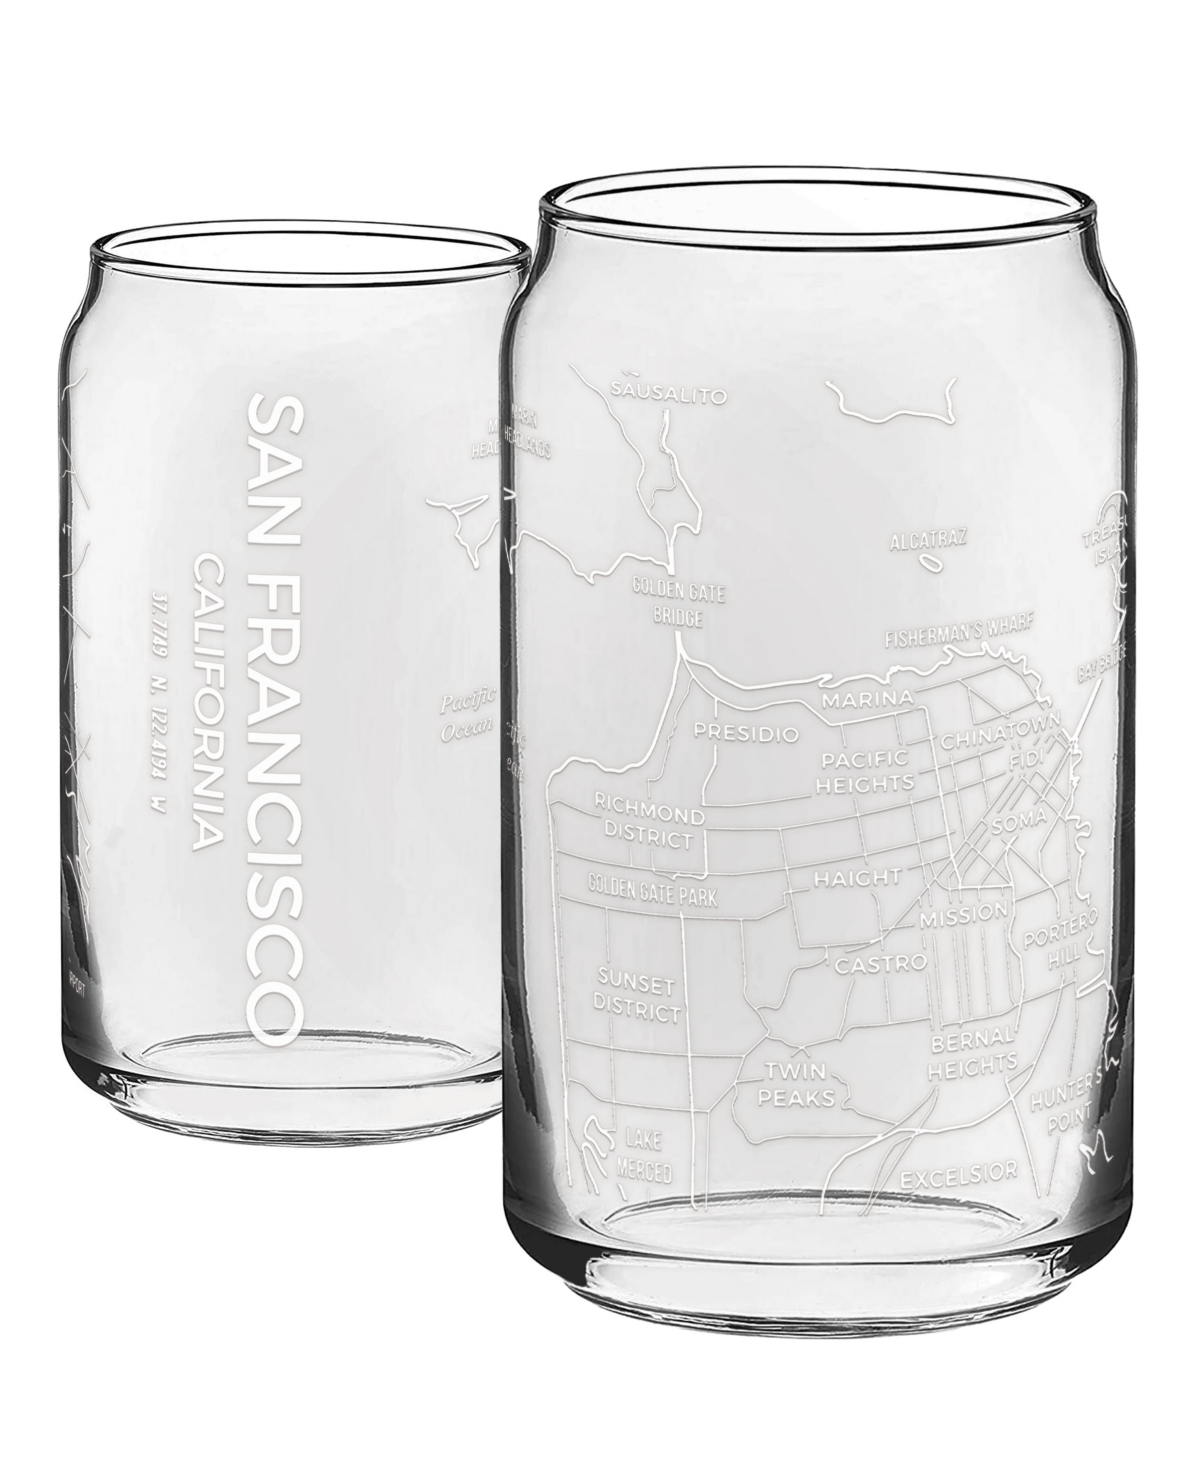 Narbo The Can San Francisco Map 16 oz Everyday Glassware, Set Of 2 In White